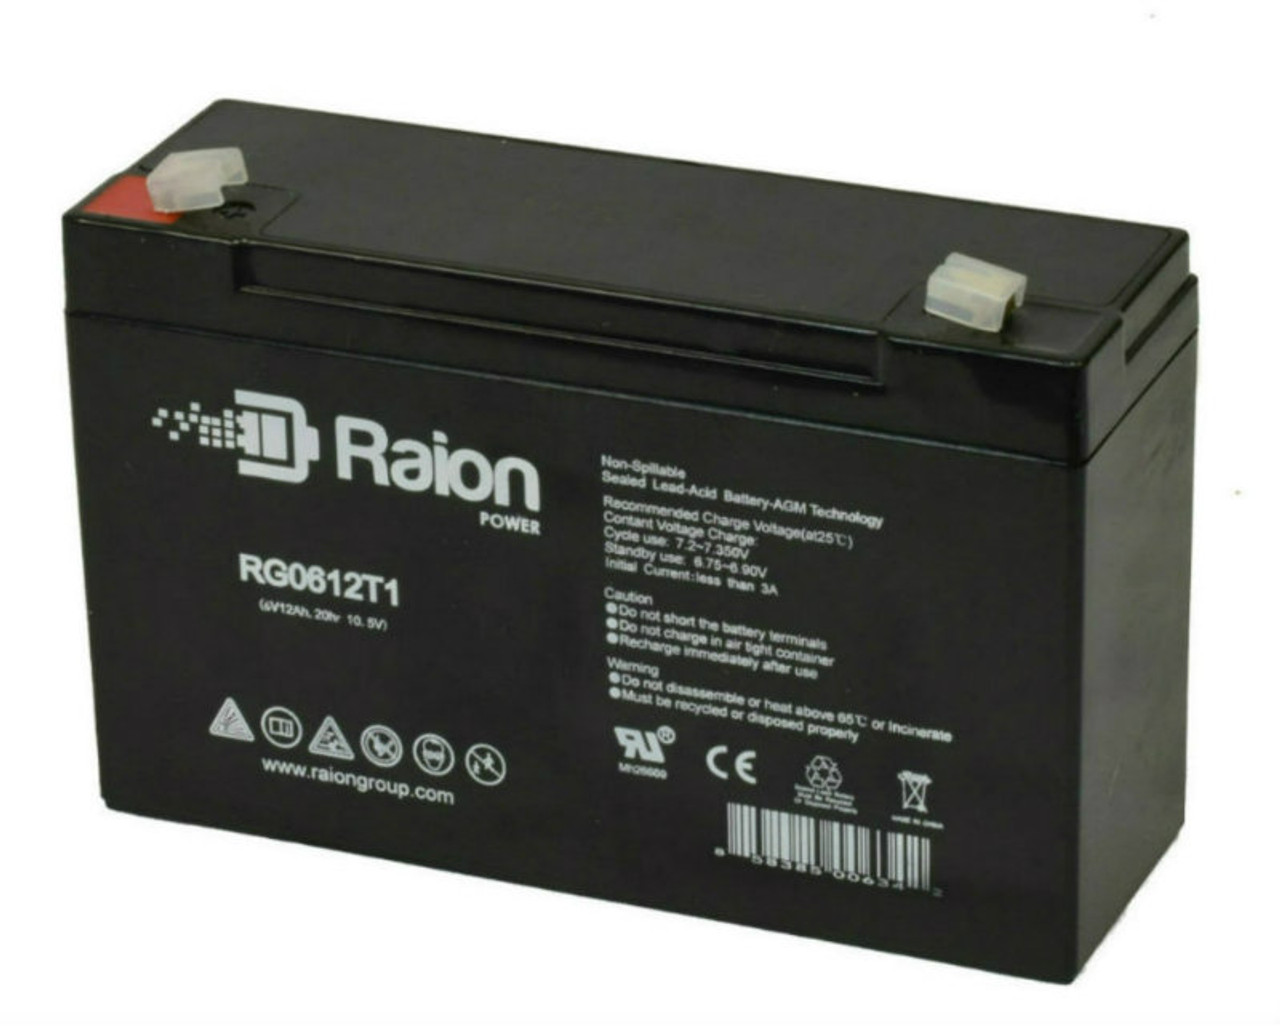 Raion Power RG06120T1 Replacement 6V 12Ah Emergency Light Battery for Holophane H1